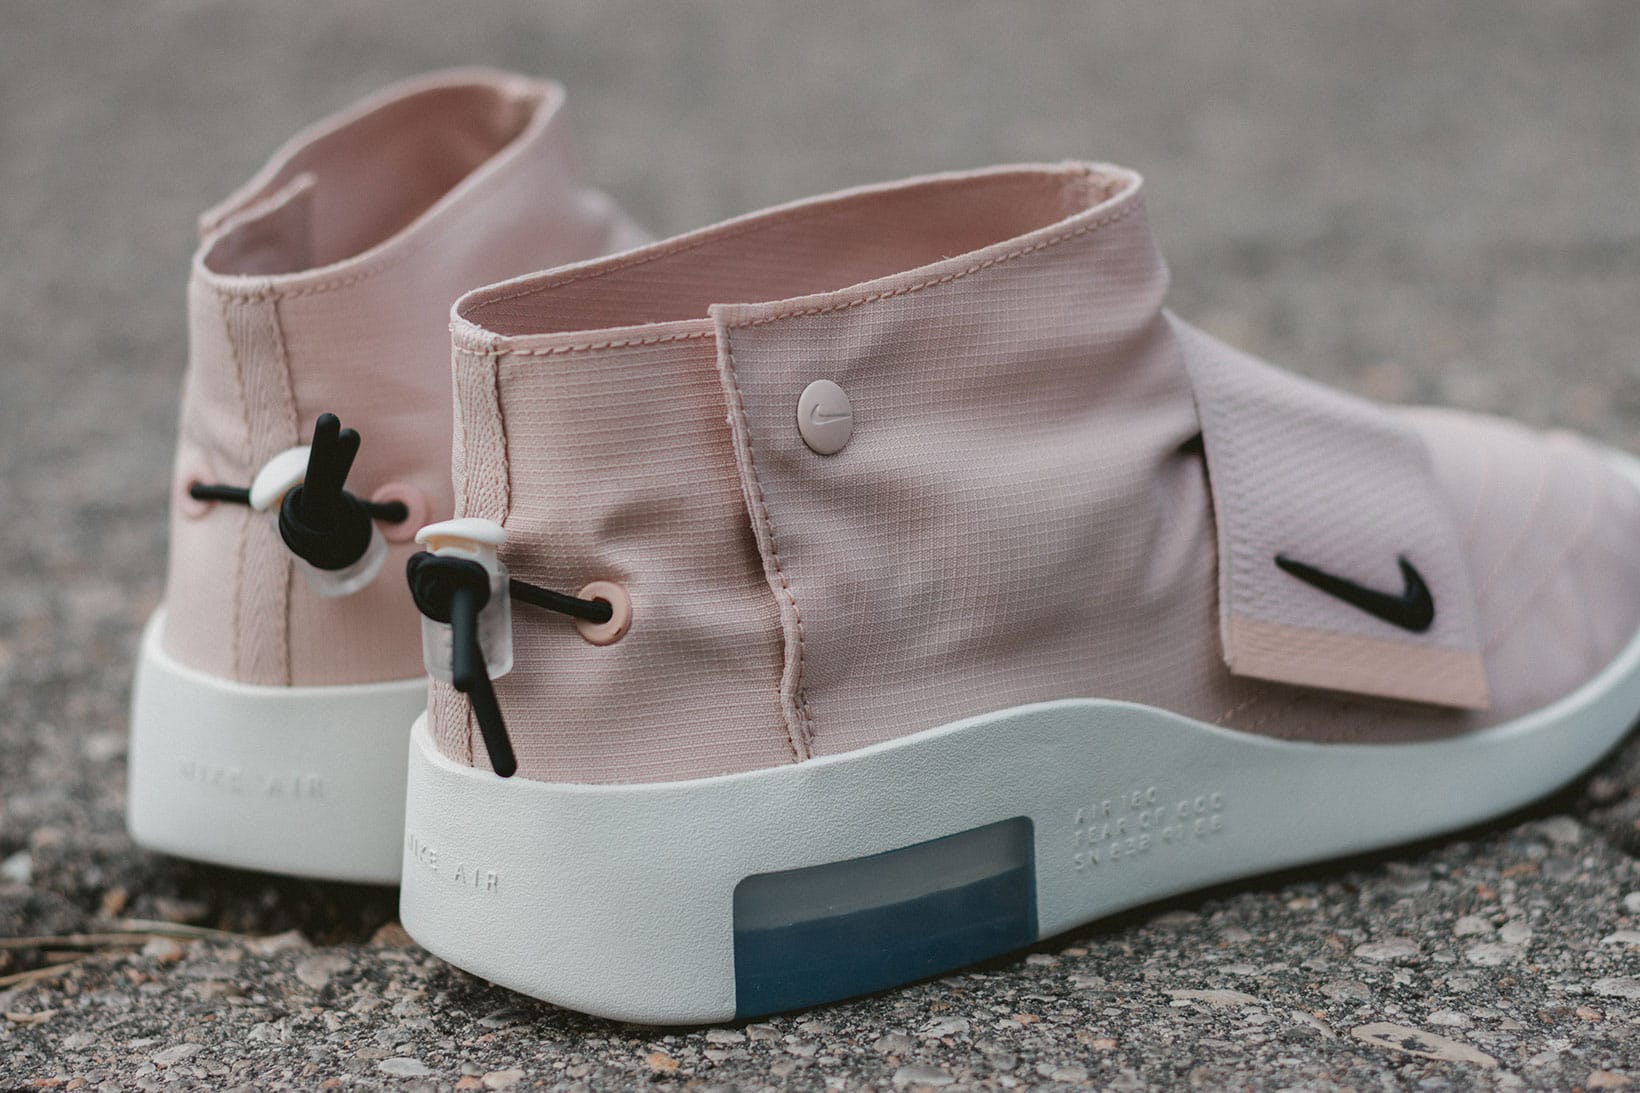 fear of god nike pink